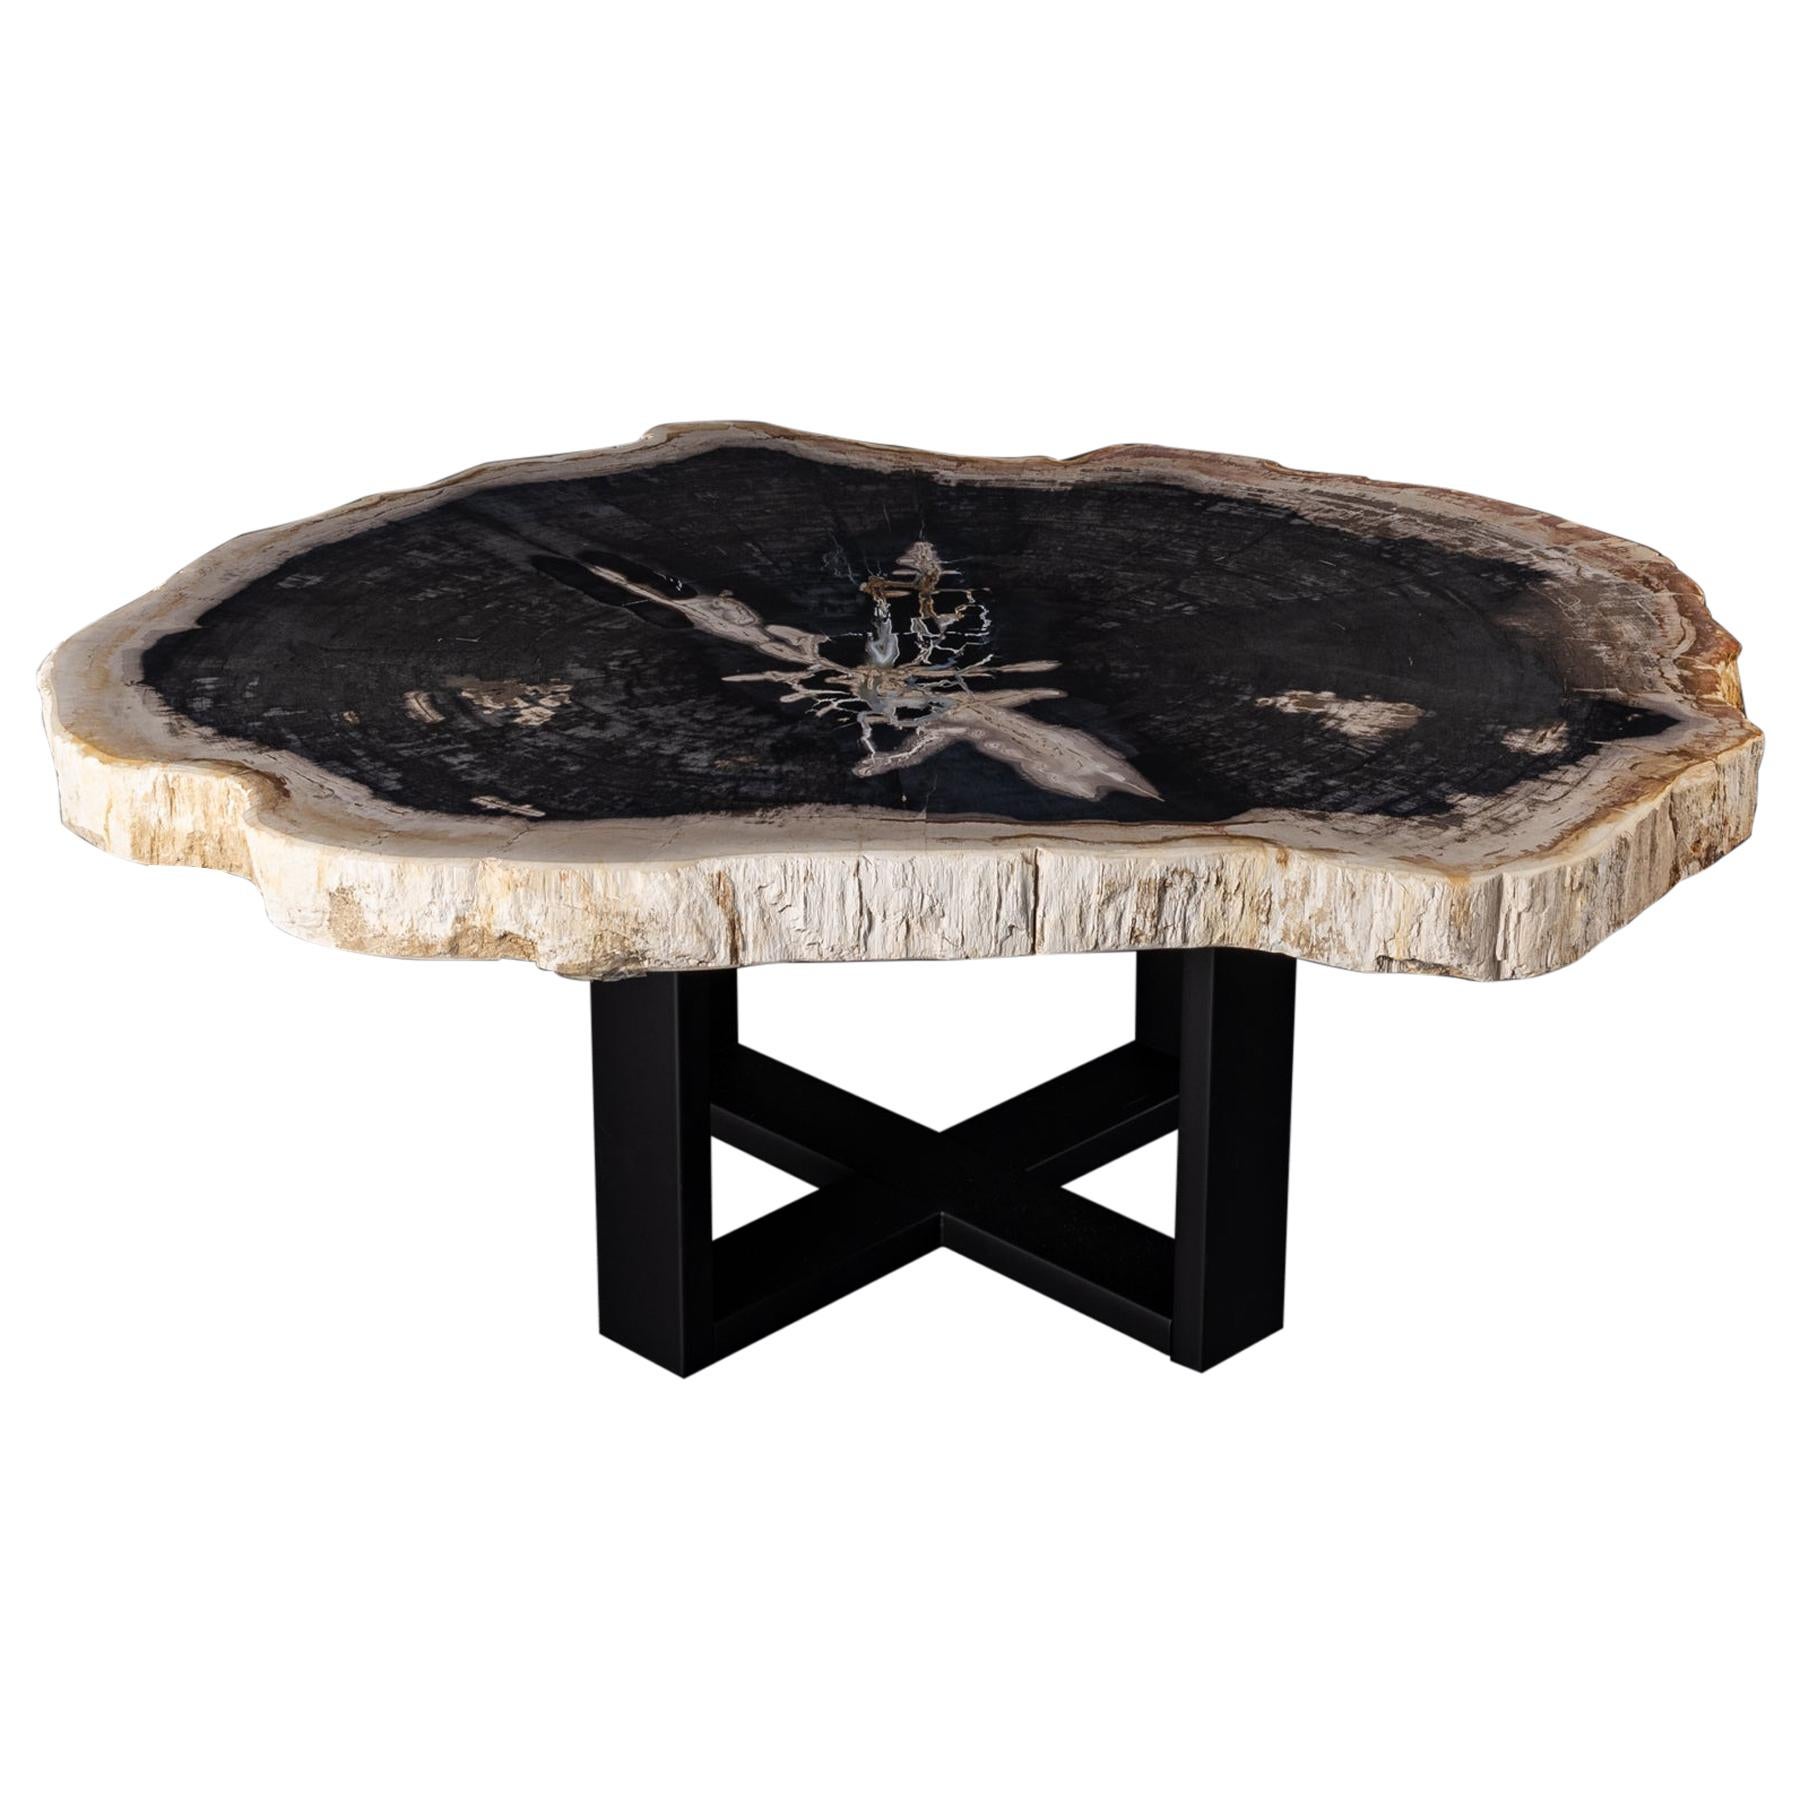 Center or Coffee Table, Natural Circular Shape, Petrified Wood with Metal Base